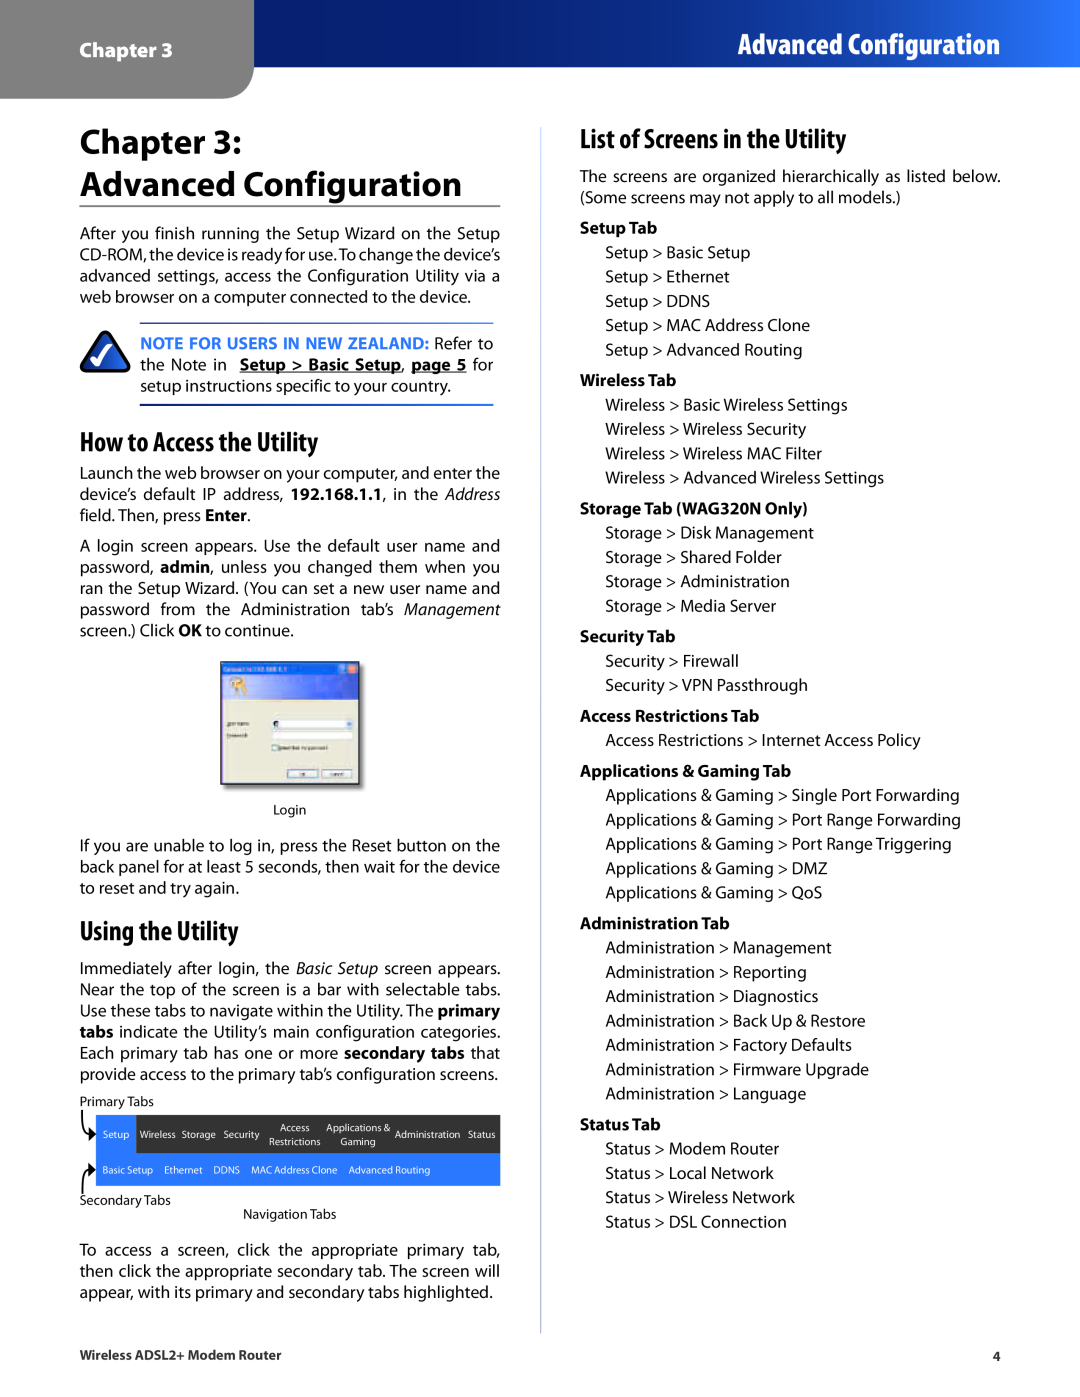 Linksys WAG160N V2, WAG320N, WAG120N manual Chapter Advanced Configuration, How to Access the Utility, Using the Utility 